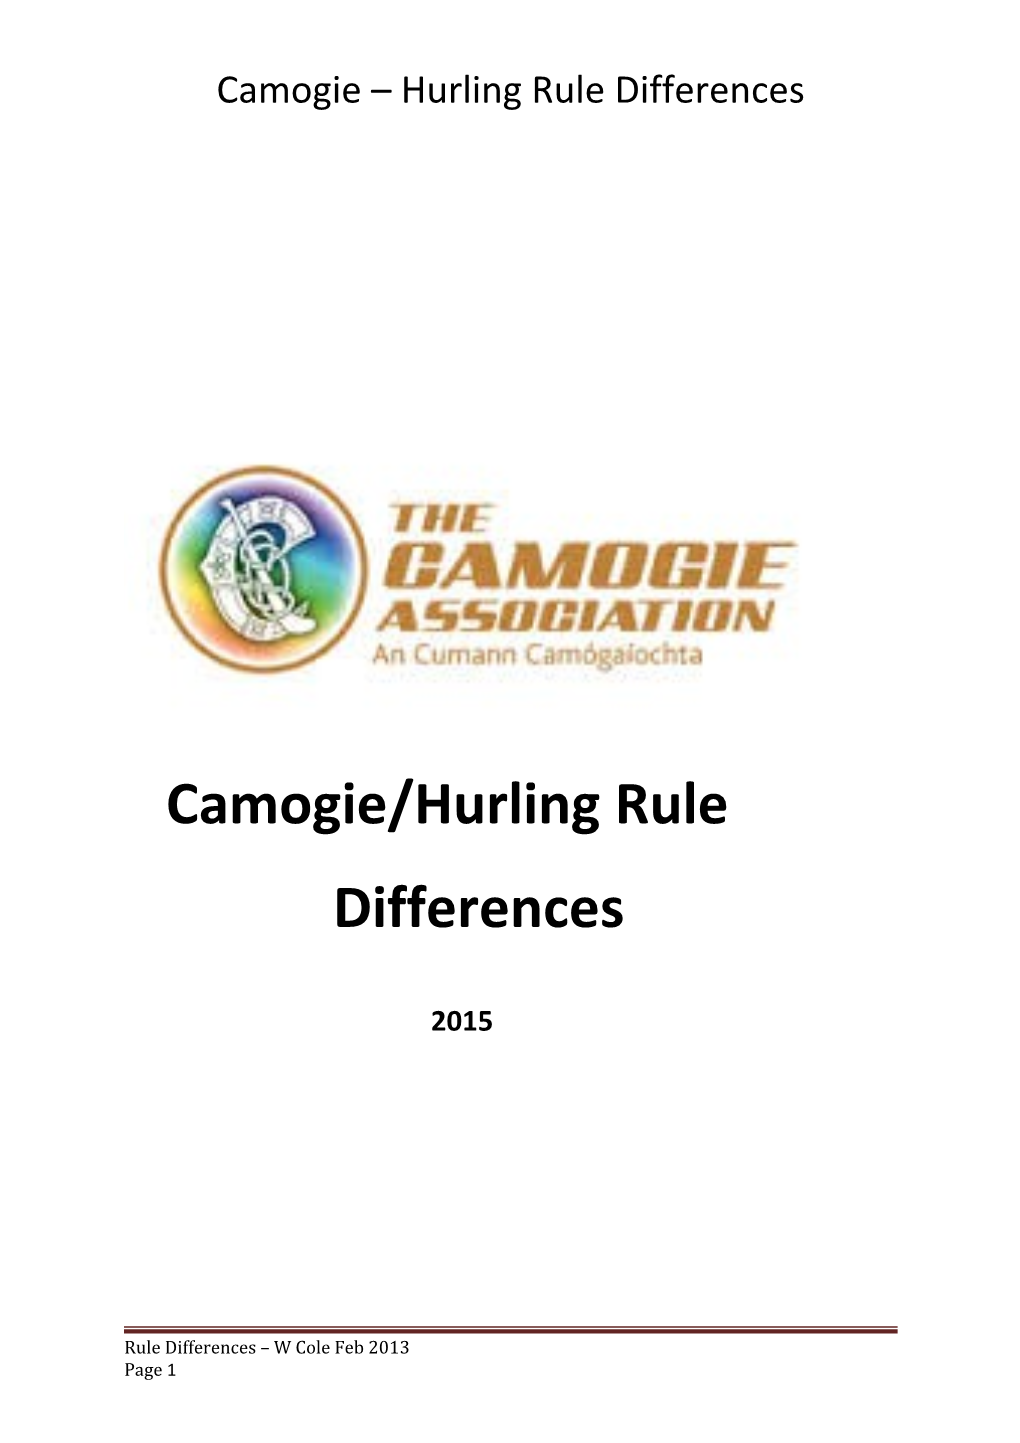 Camogie Hurling Rule Differences